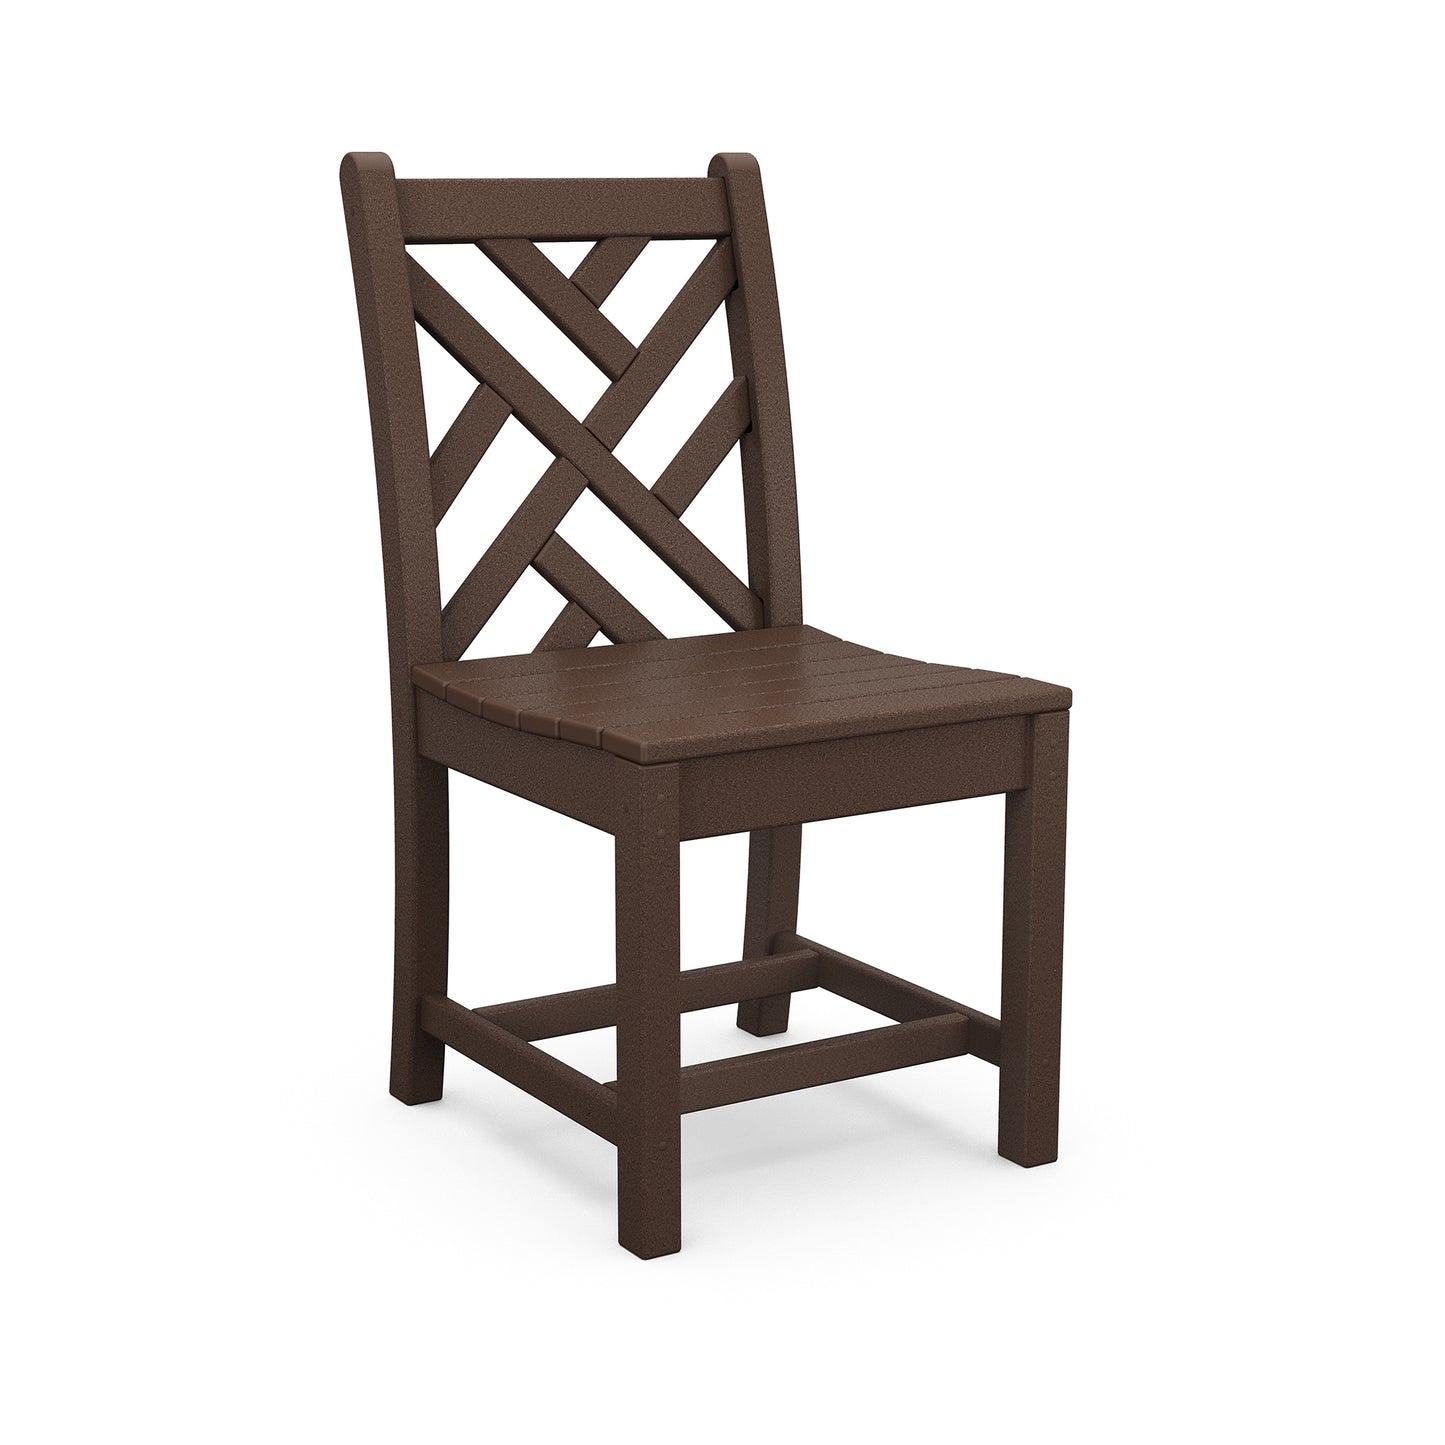 A brown outdoor dining chair with a criss-cross back design, made from durable POLYWOOD® and resembling wood, shown against a white background.